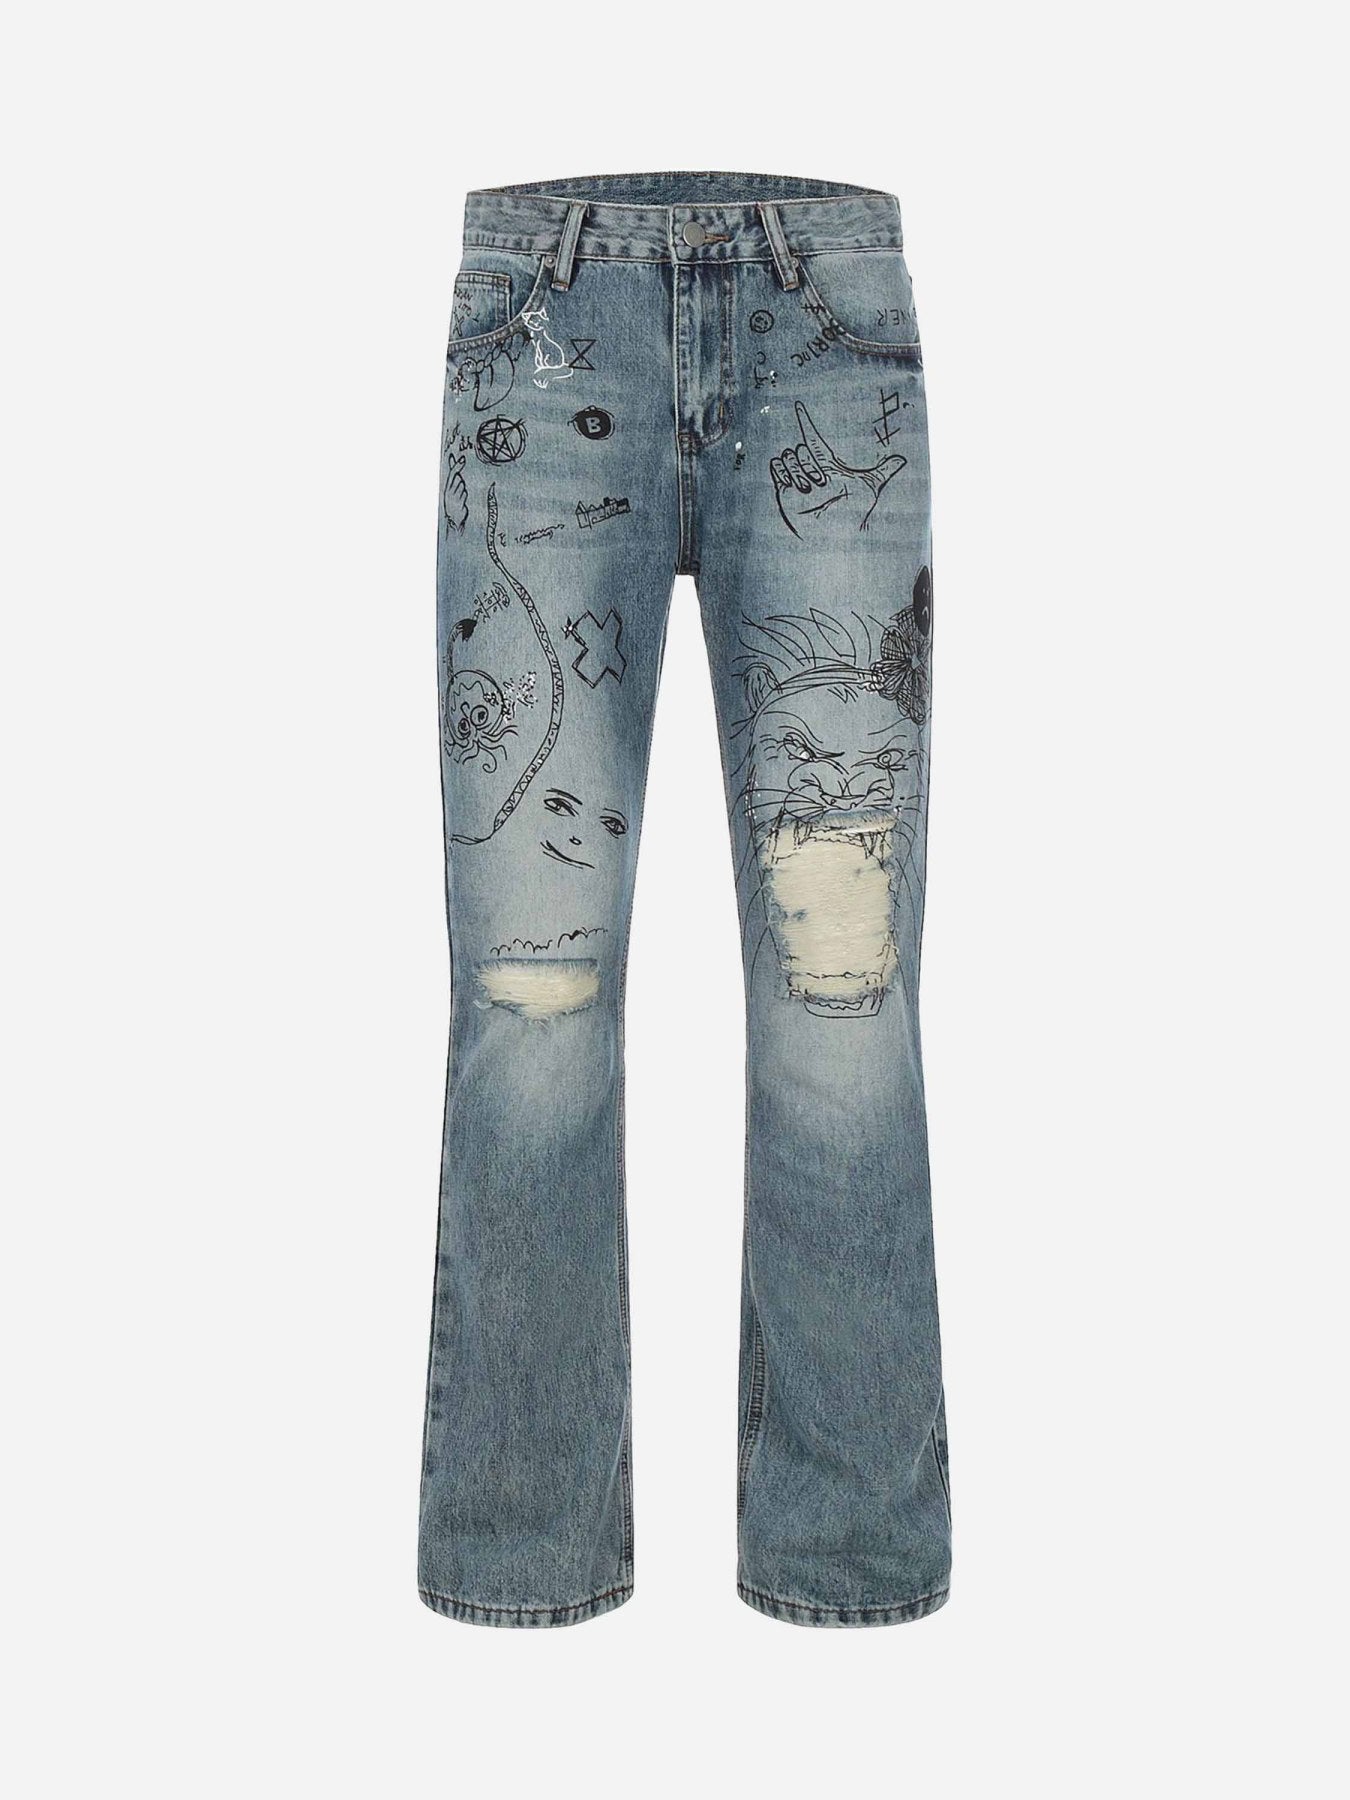 Thesupermade Washed Graffiti Ripped Jeans